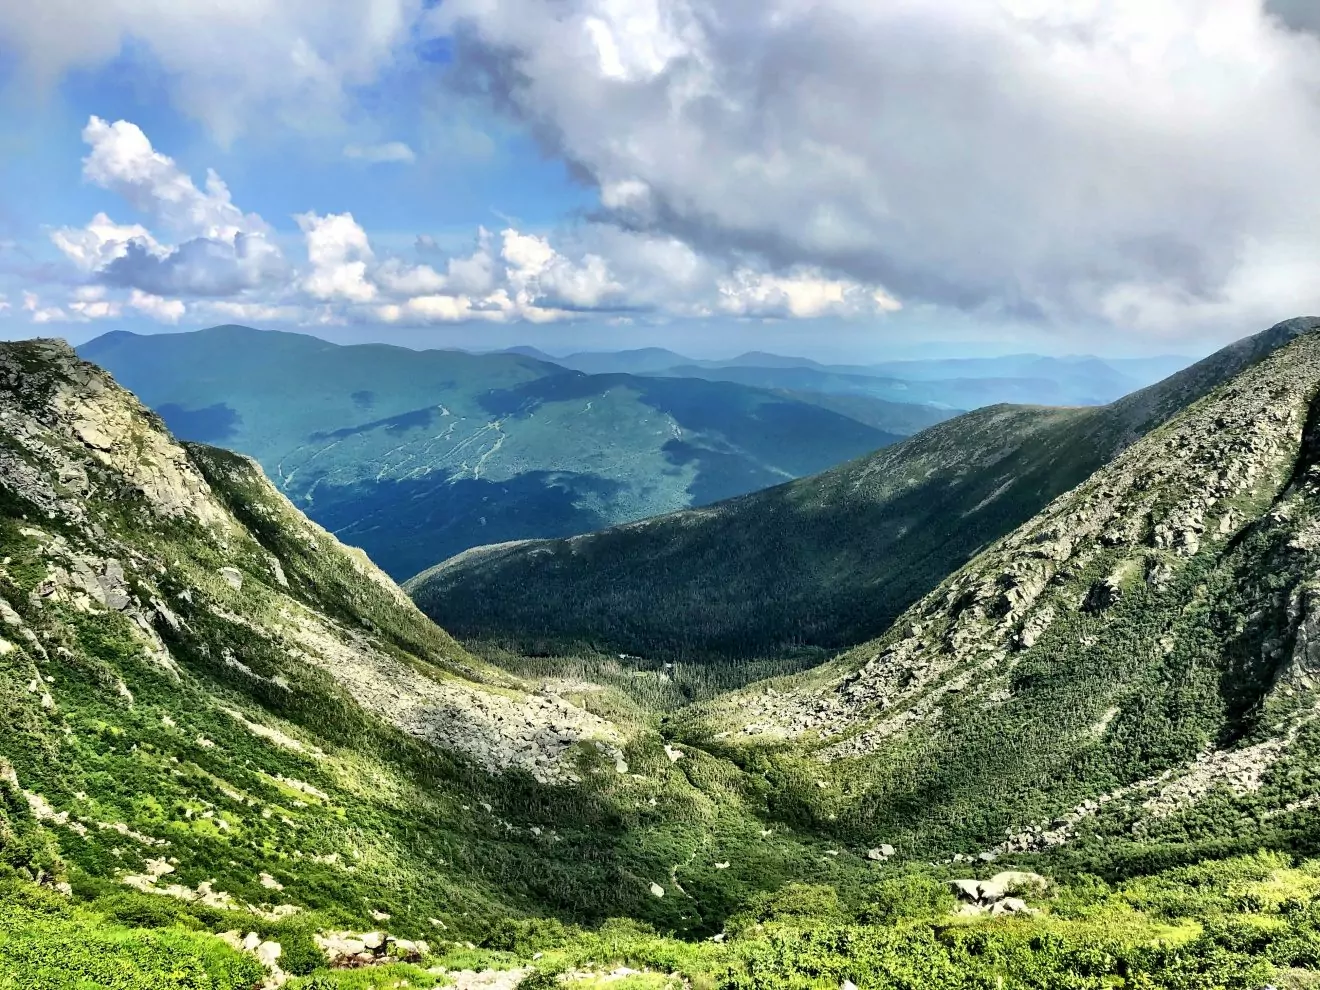 Looking down Tuckerman's Ravine in the White Mountains in New Hampshire